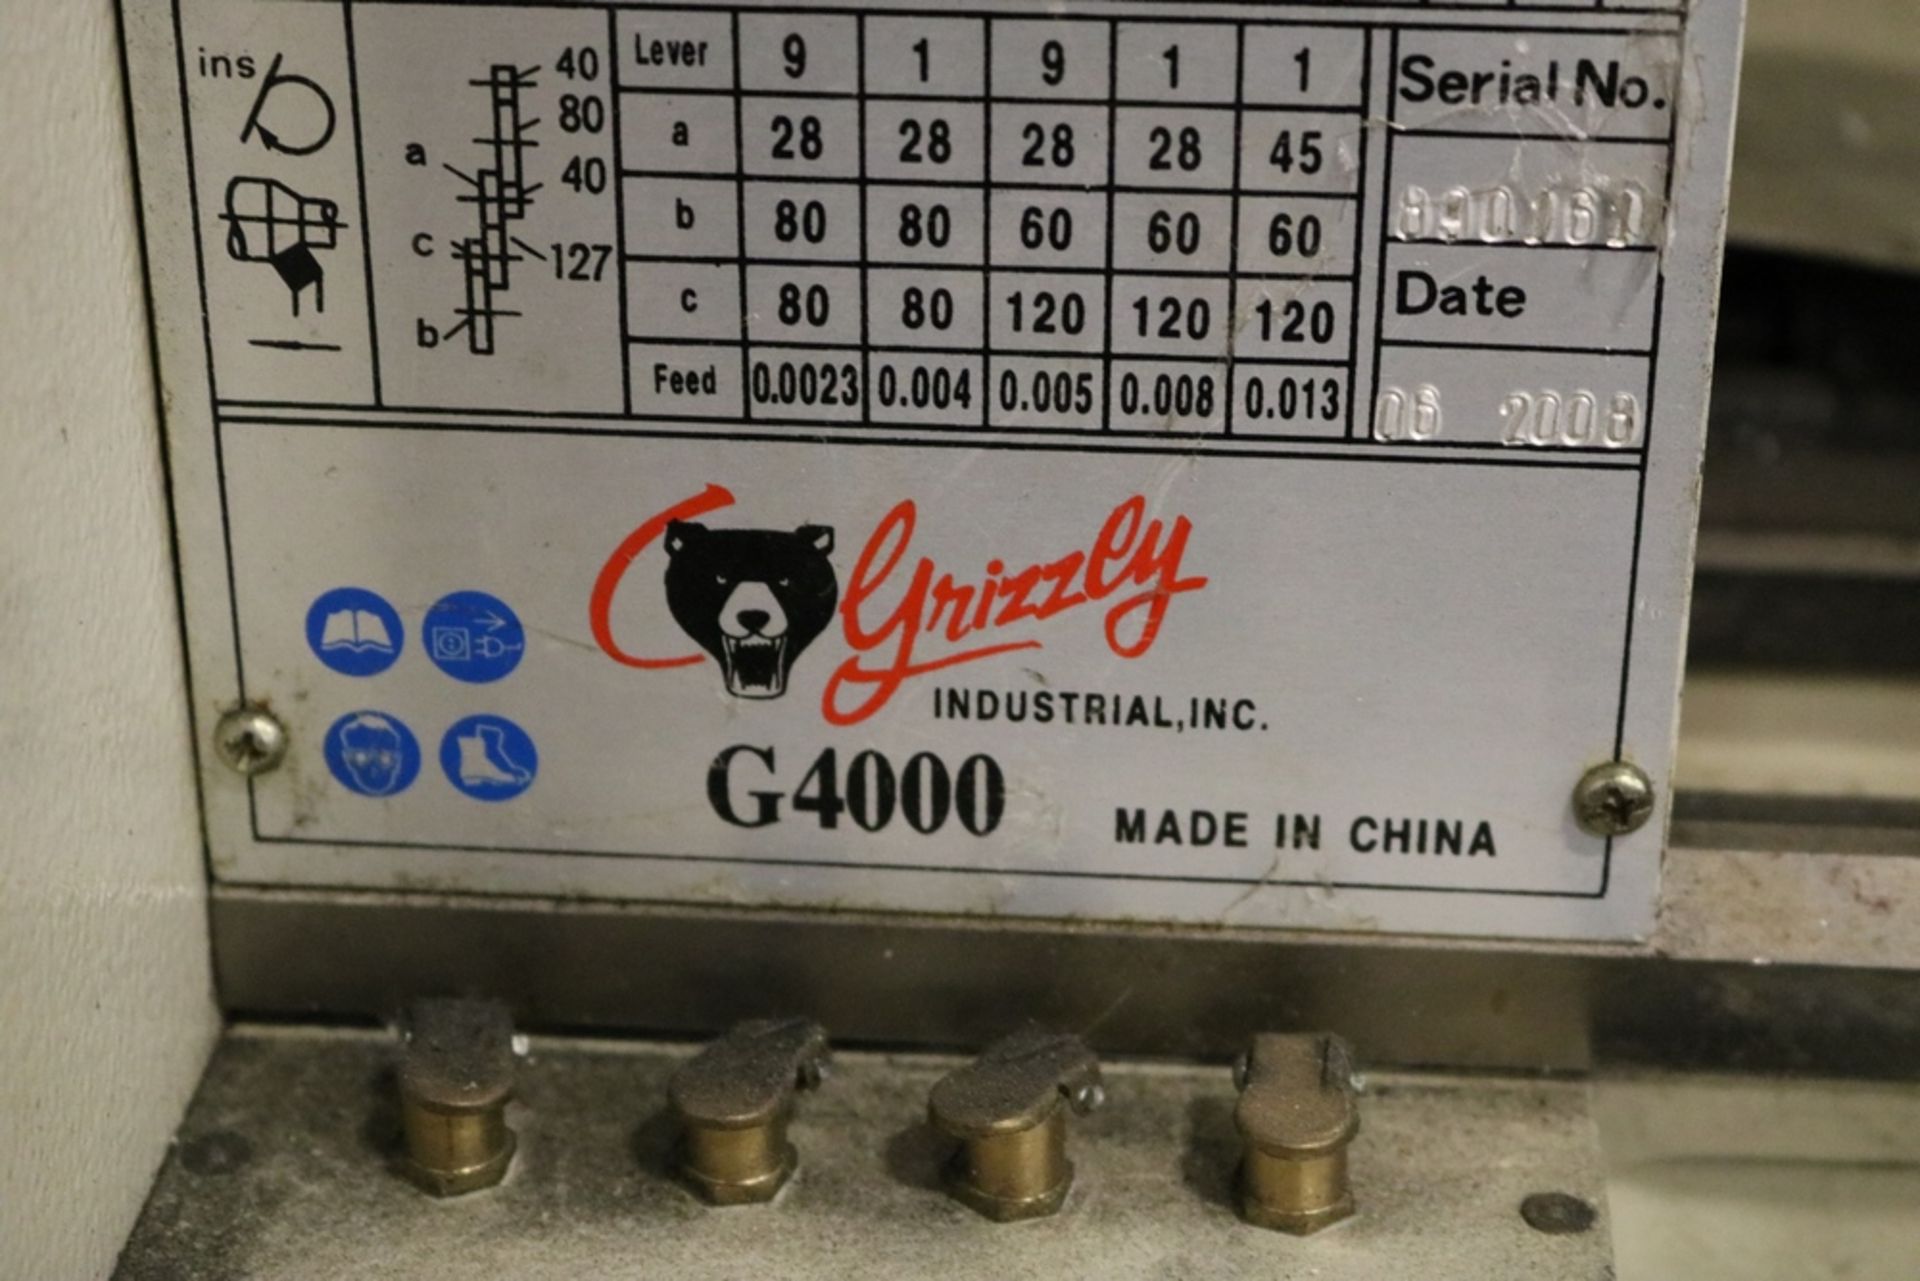 Grizzly Industrial G4000 9" x 19" Bench Lathe on Stand, 3 Jaw & 4Jaw Chuck & Others - Image 4 of 7